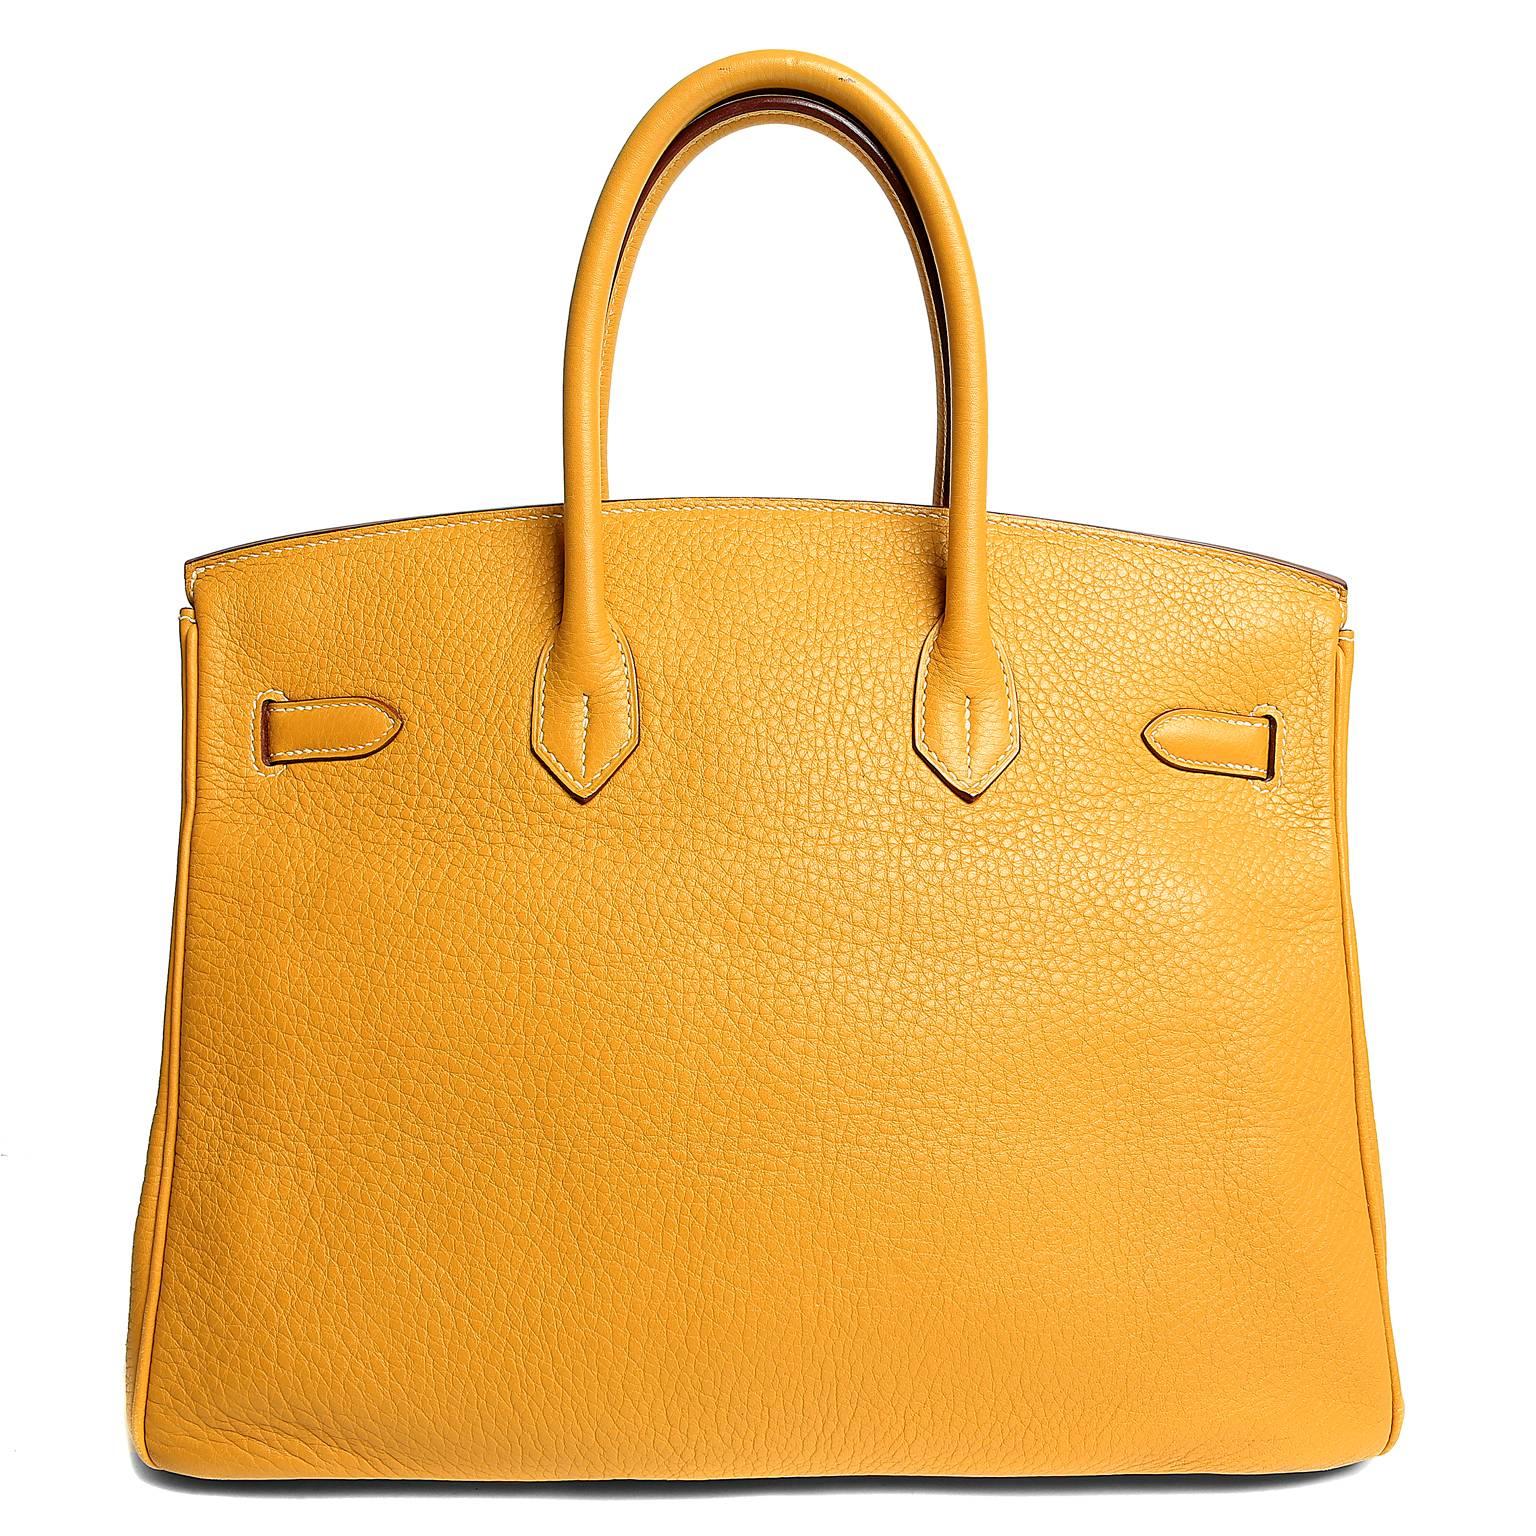 Hermès Moutarde Clemence 35 cm Birkin- PRISTINE
 Hermès bags are considered the ultimate luxury item the world over.  Hand stitched by skilled craftsmen, wait lists of a year or more are commonplace.  Moutarde is a lovely golden yellow with warm